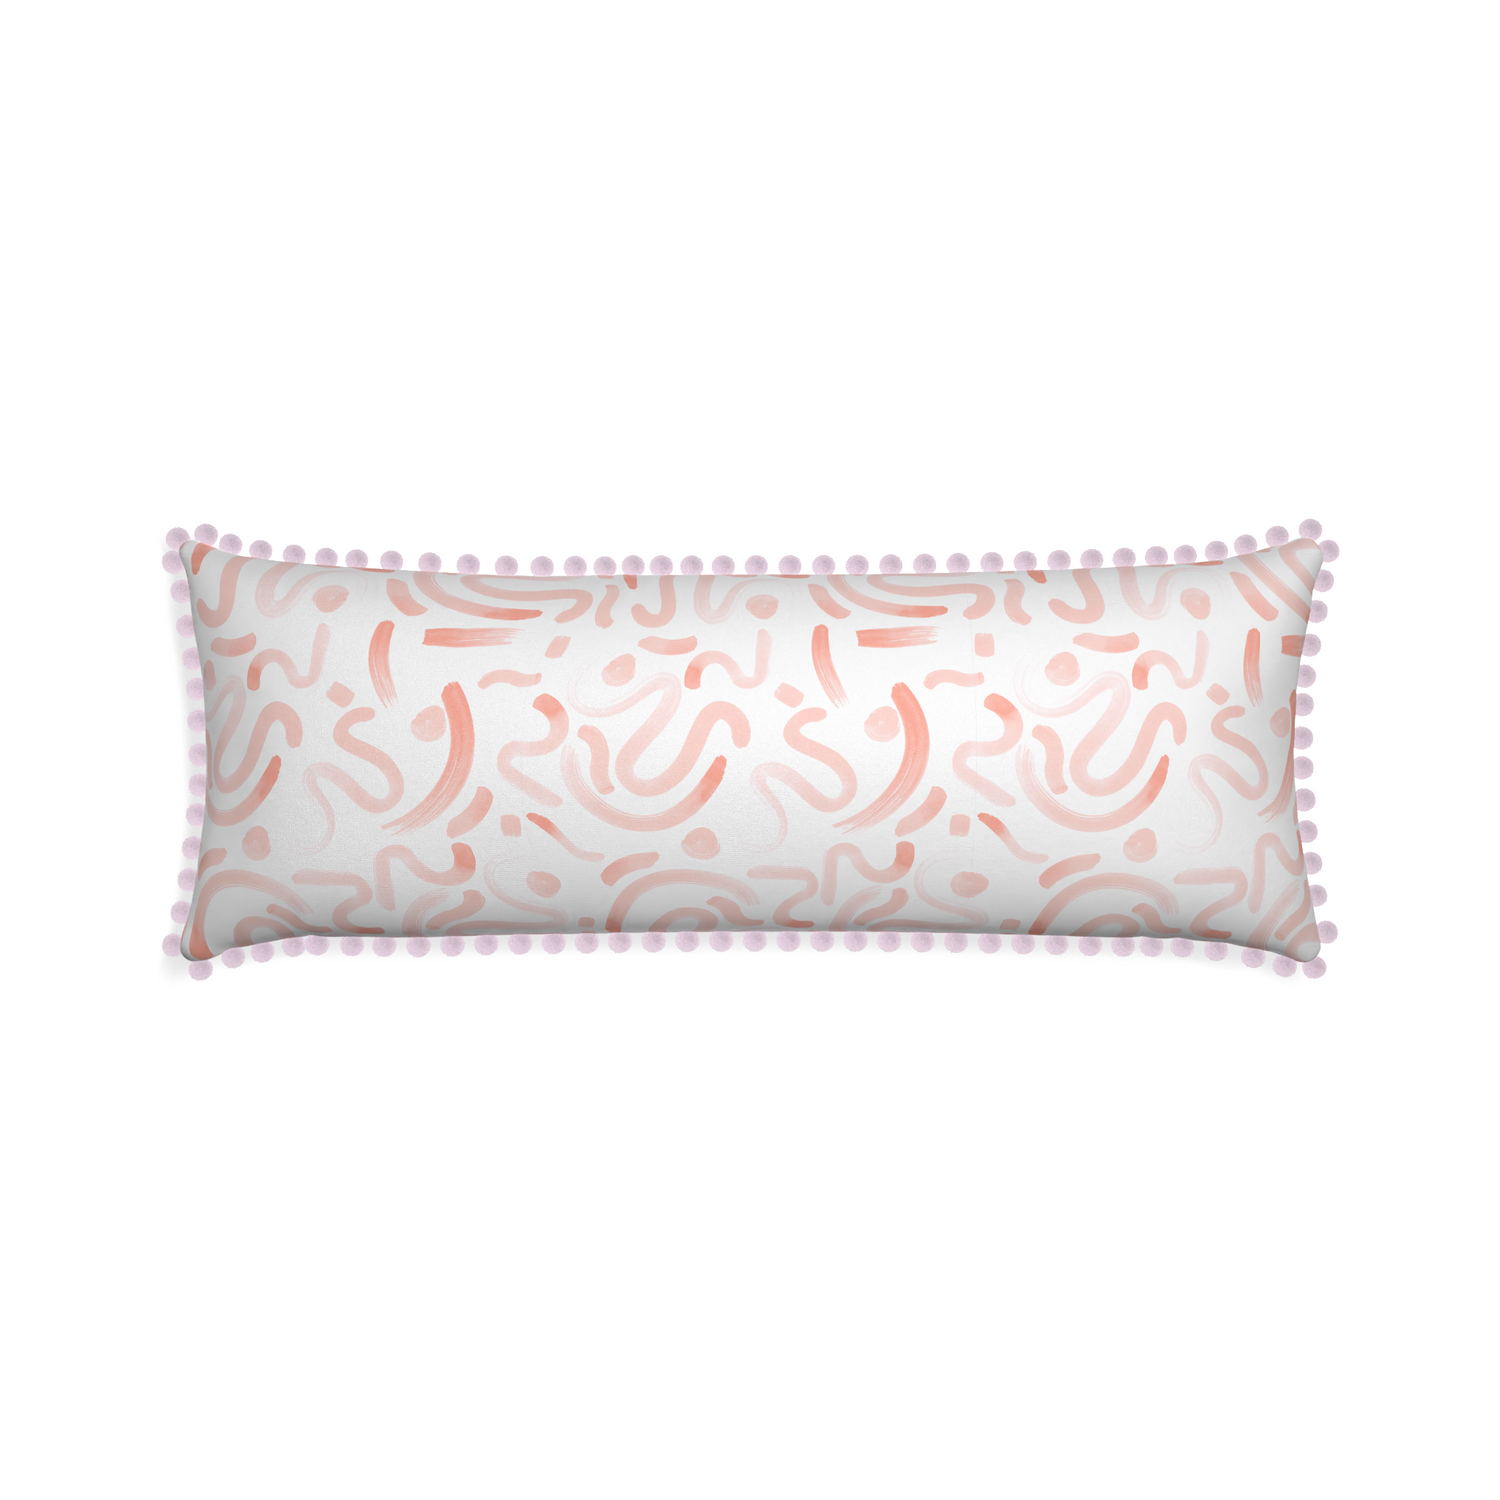 Xl-lumbar hockney pink custom pink graphicpillow with l on white background